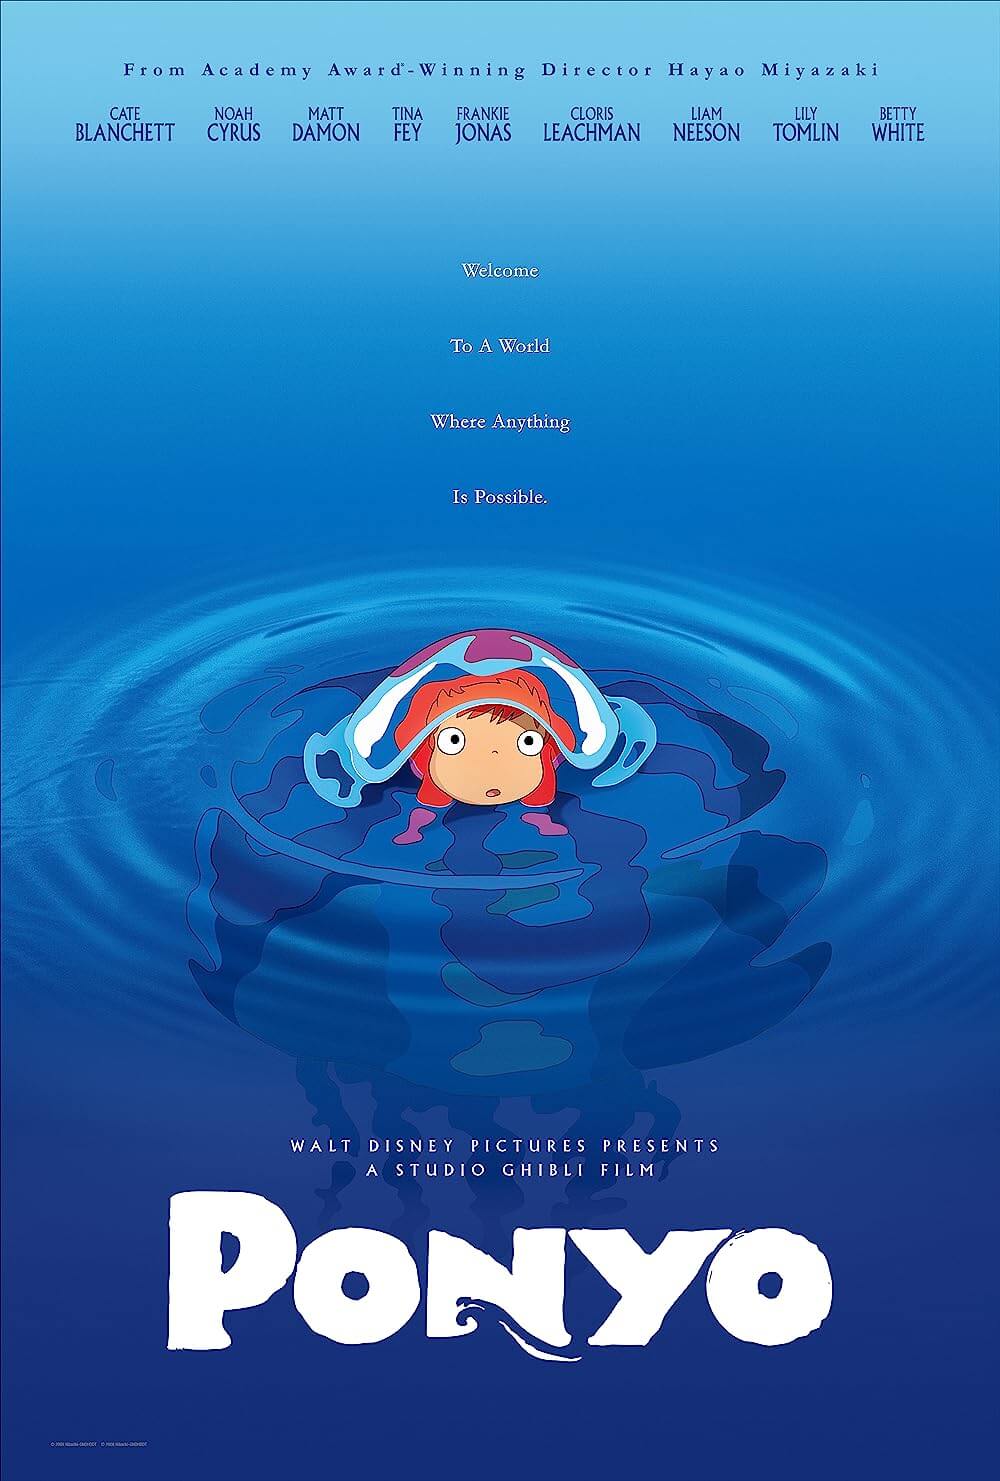 Watch Ponyo today, it's one of the best Studio Ghibli movies and best G rated movies on Netflix! Recommended for 5+ year olds.